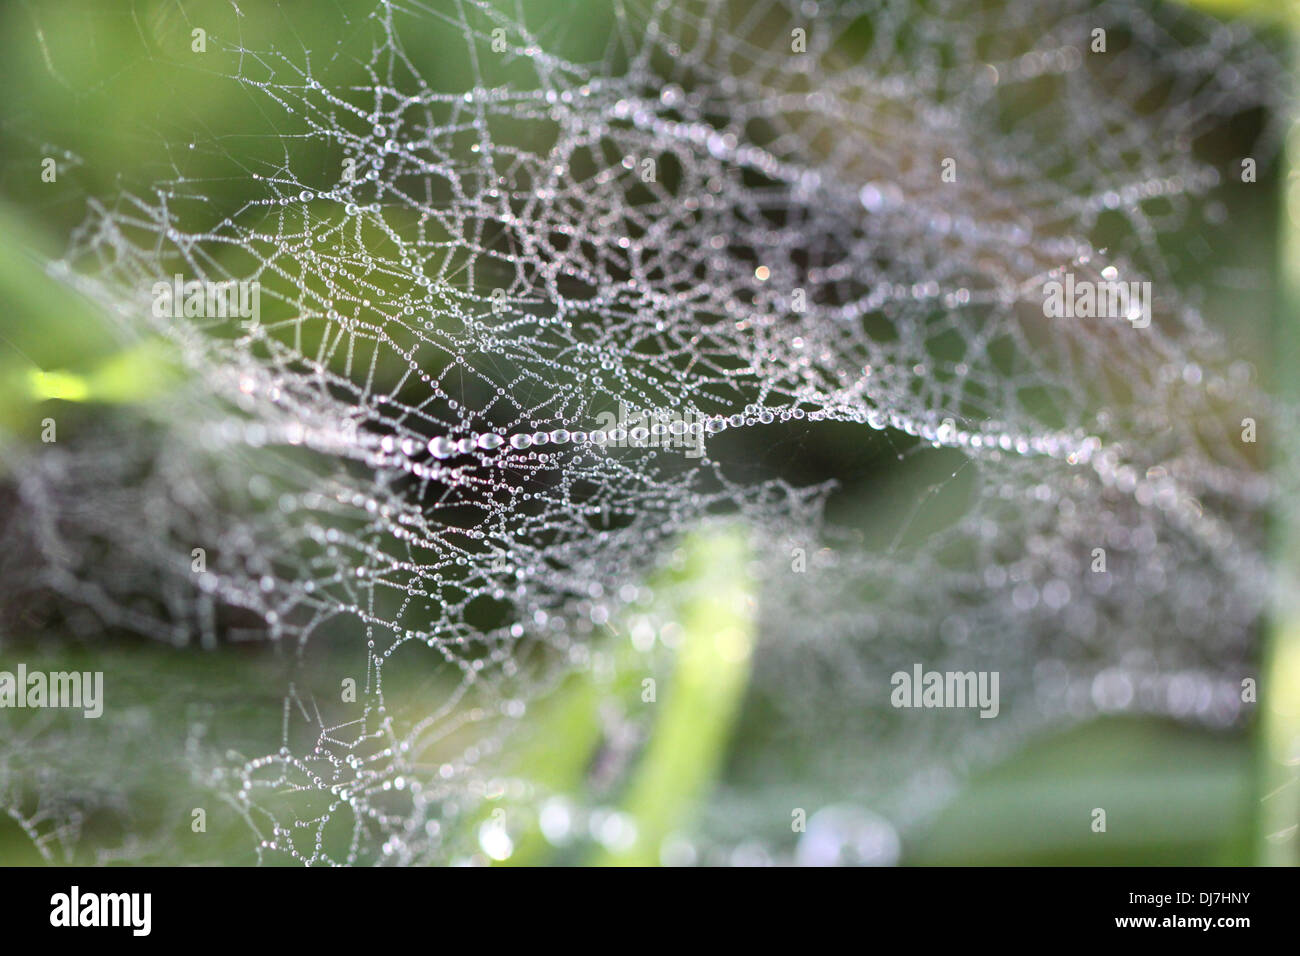 Drops of dew on  spider web in the grass Stock Photo